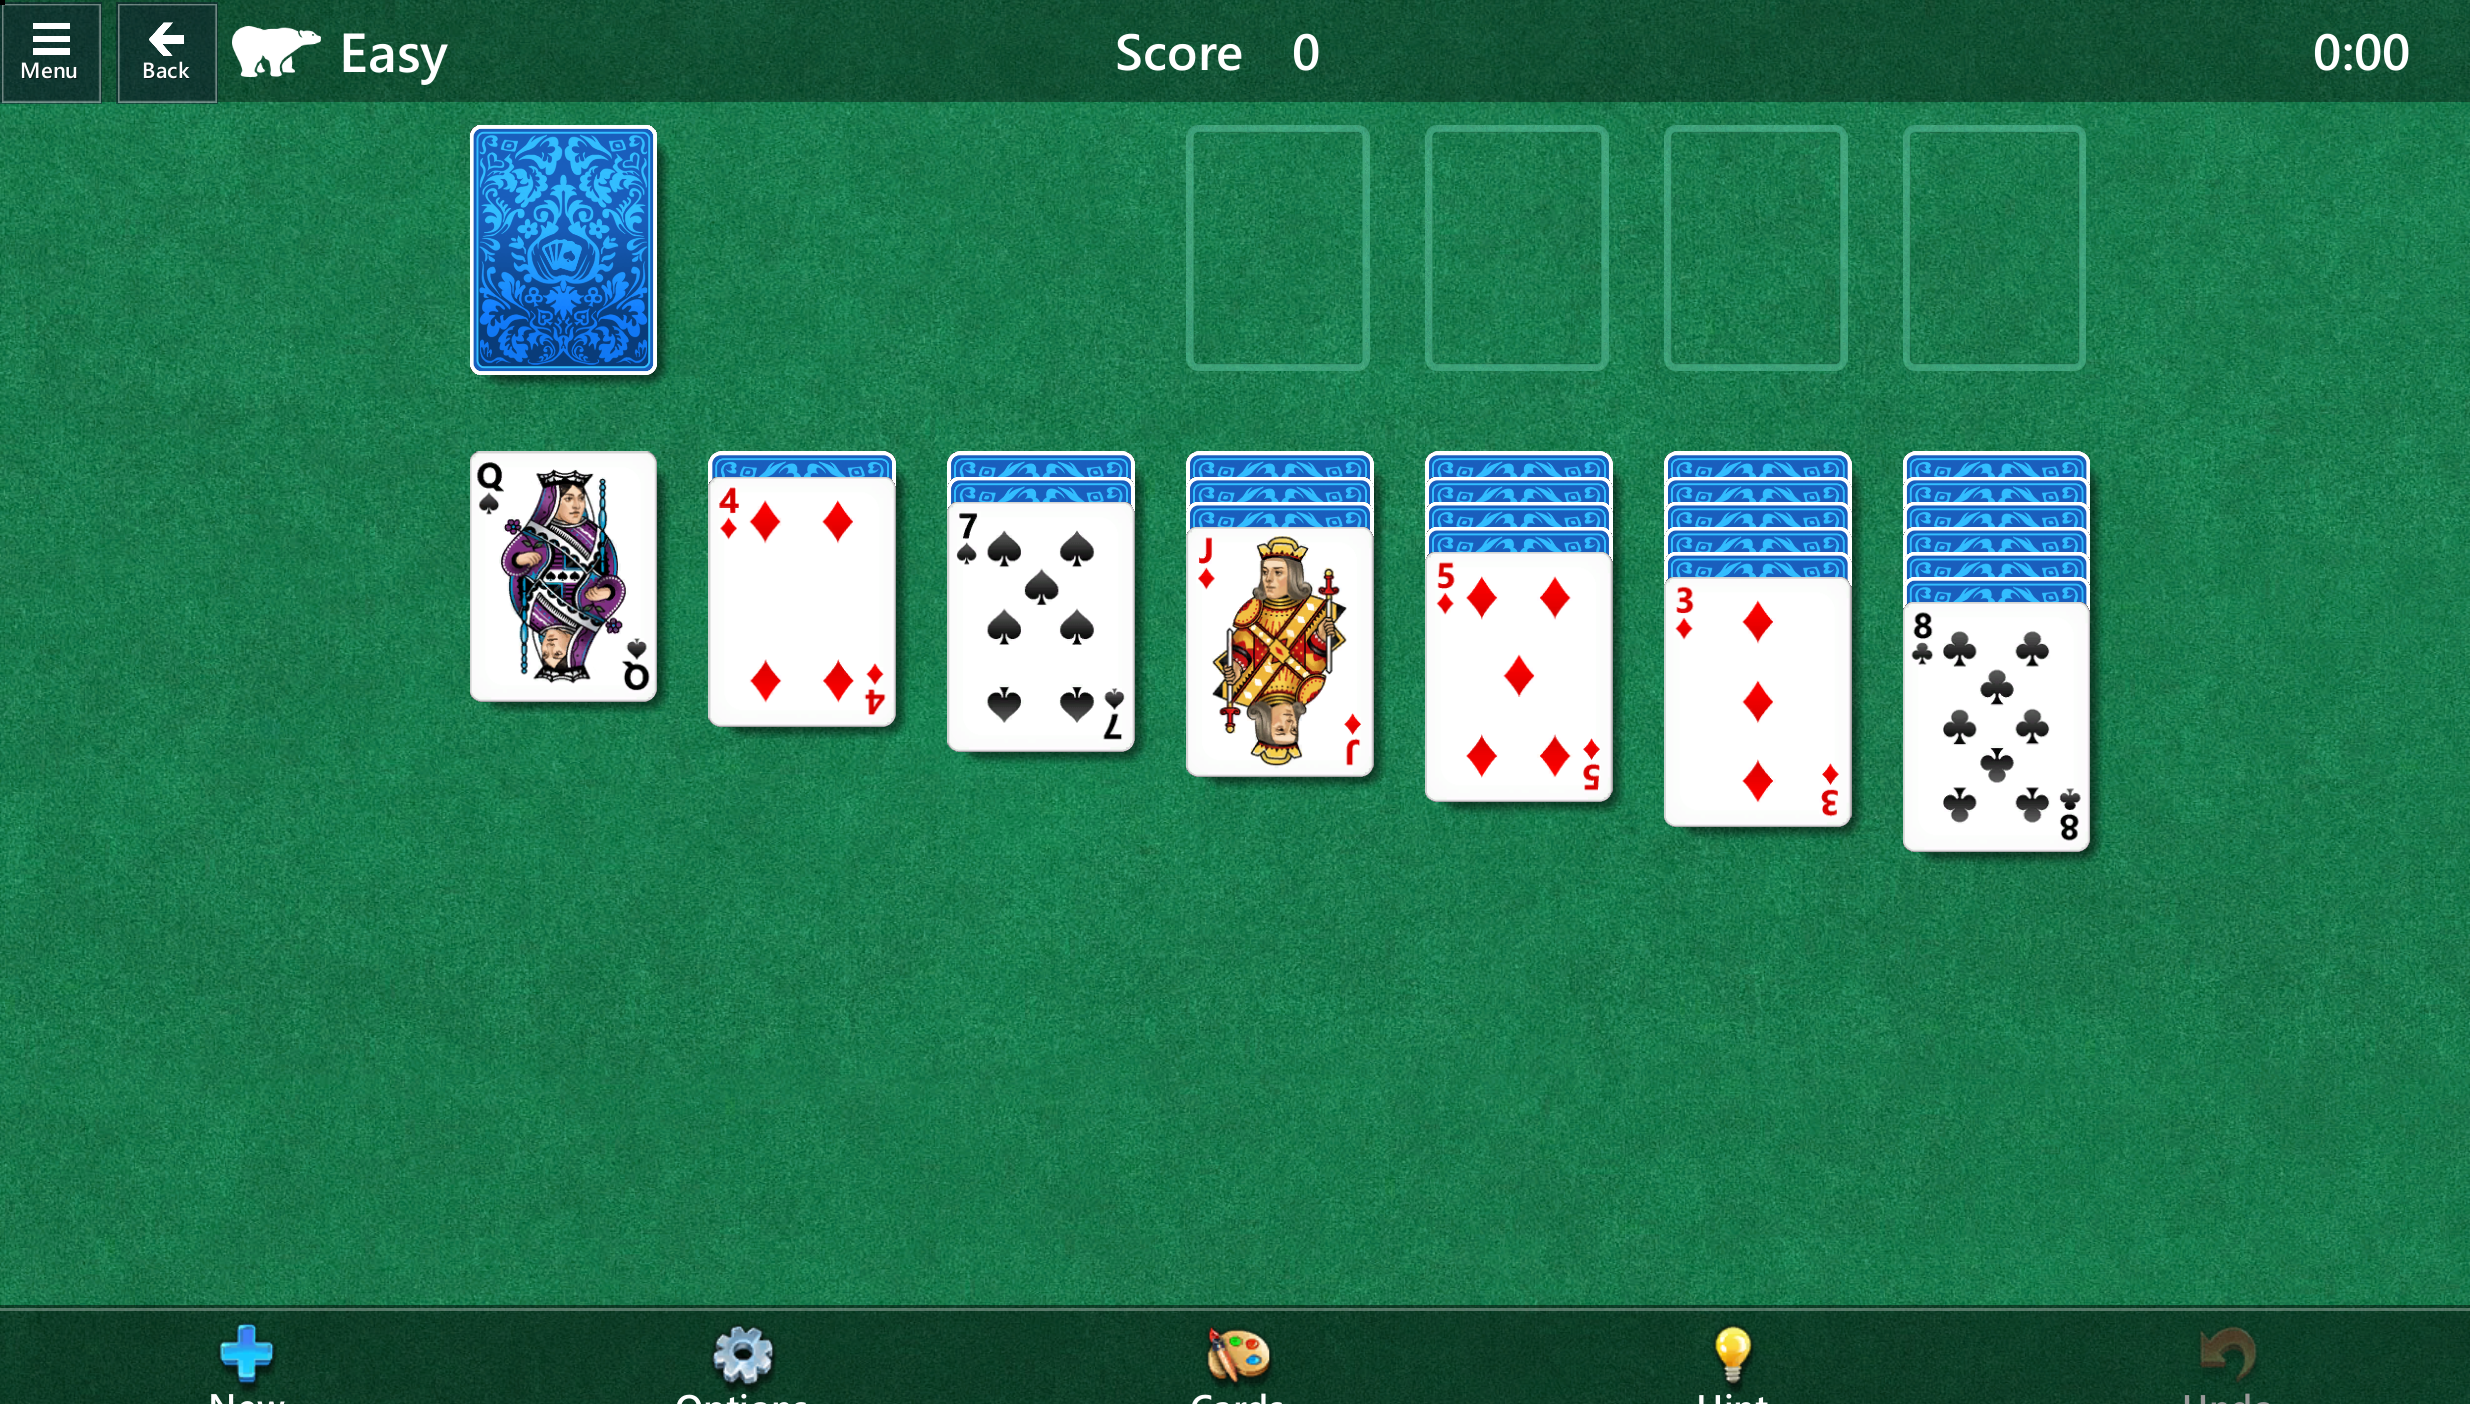 Standard solitaire game mode. White cards are laid out on a green table. The back of the cards show an intricate leafy green pattern.